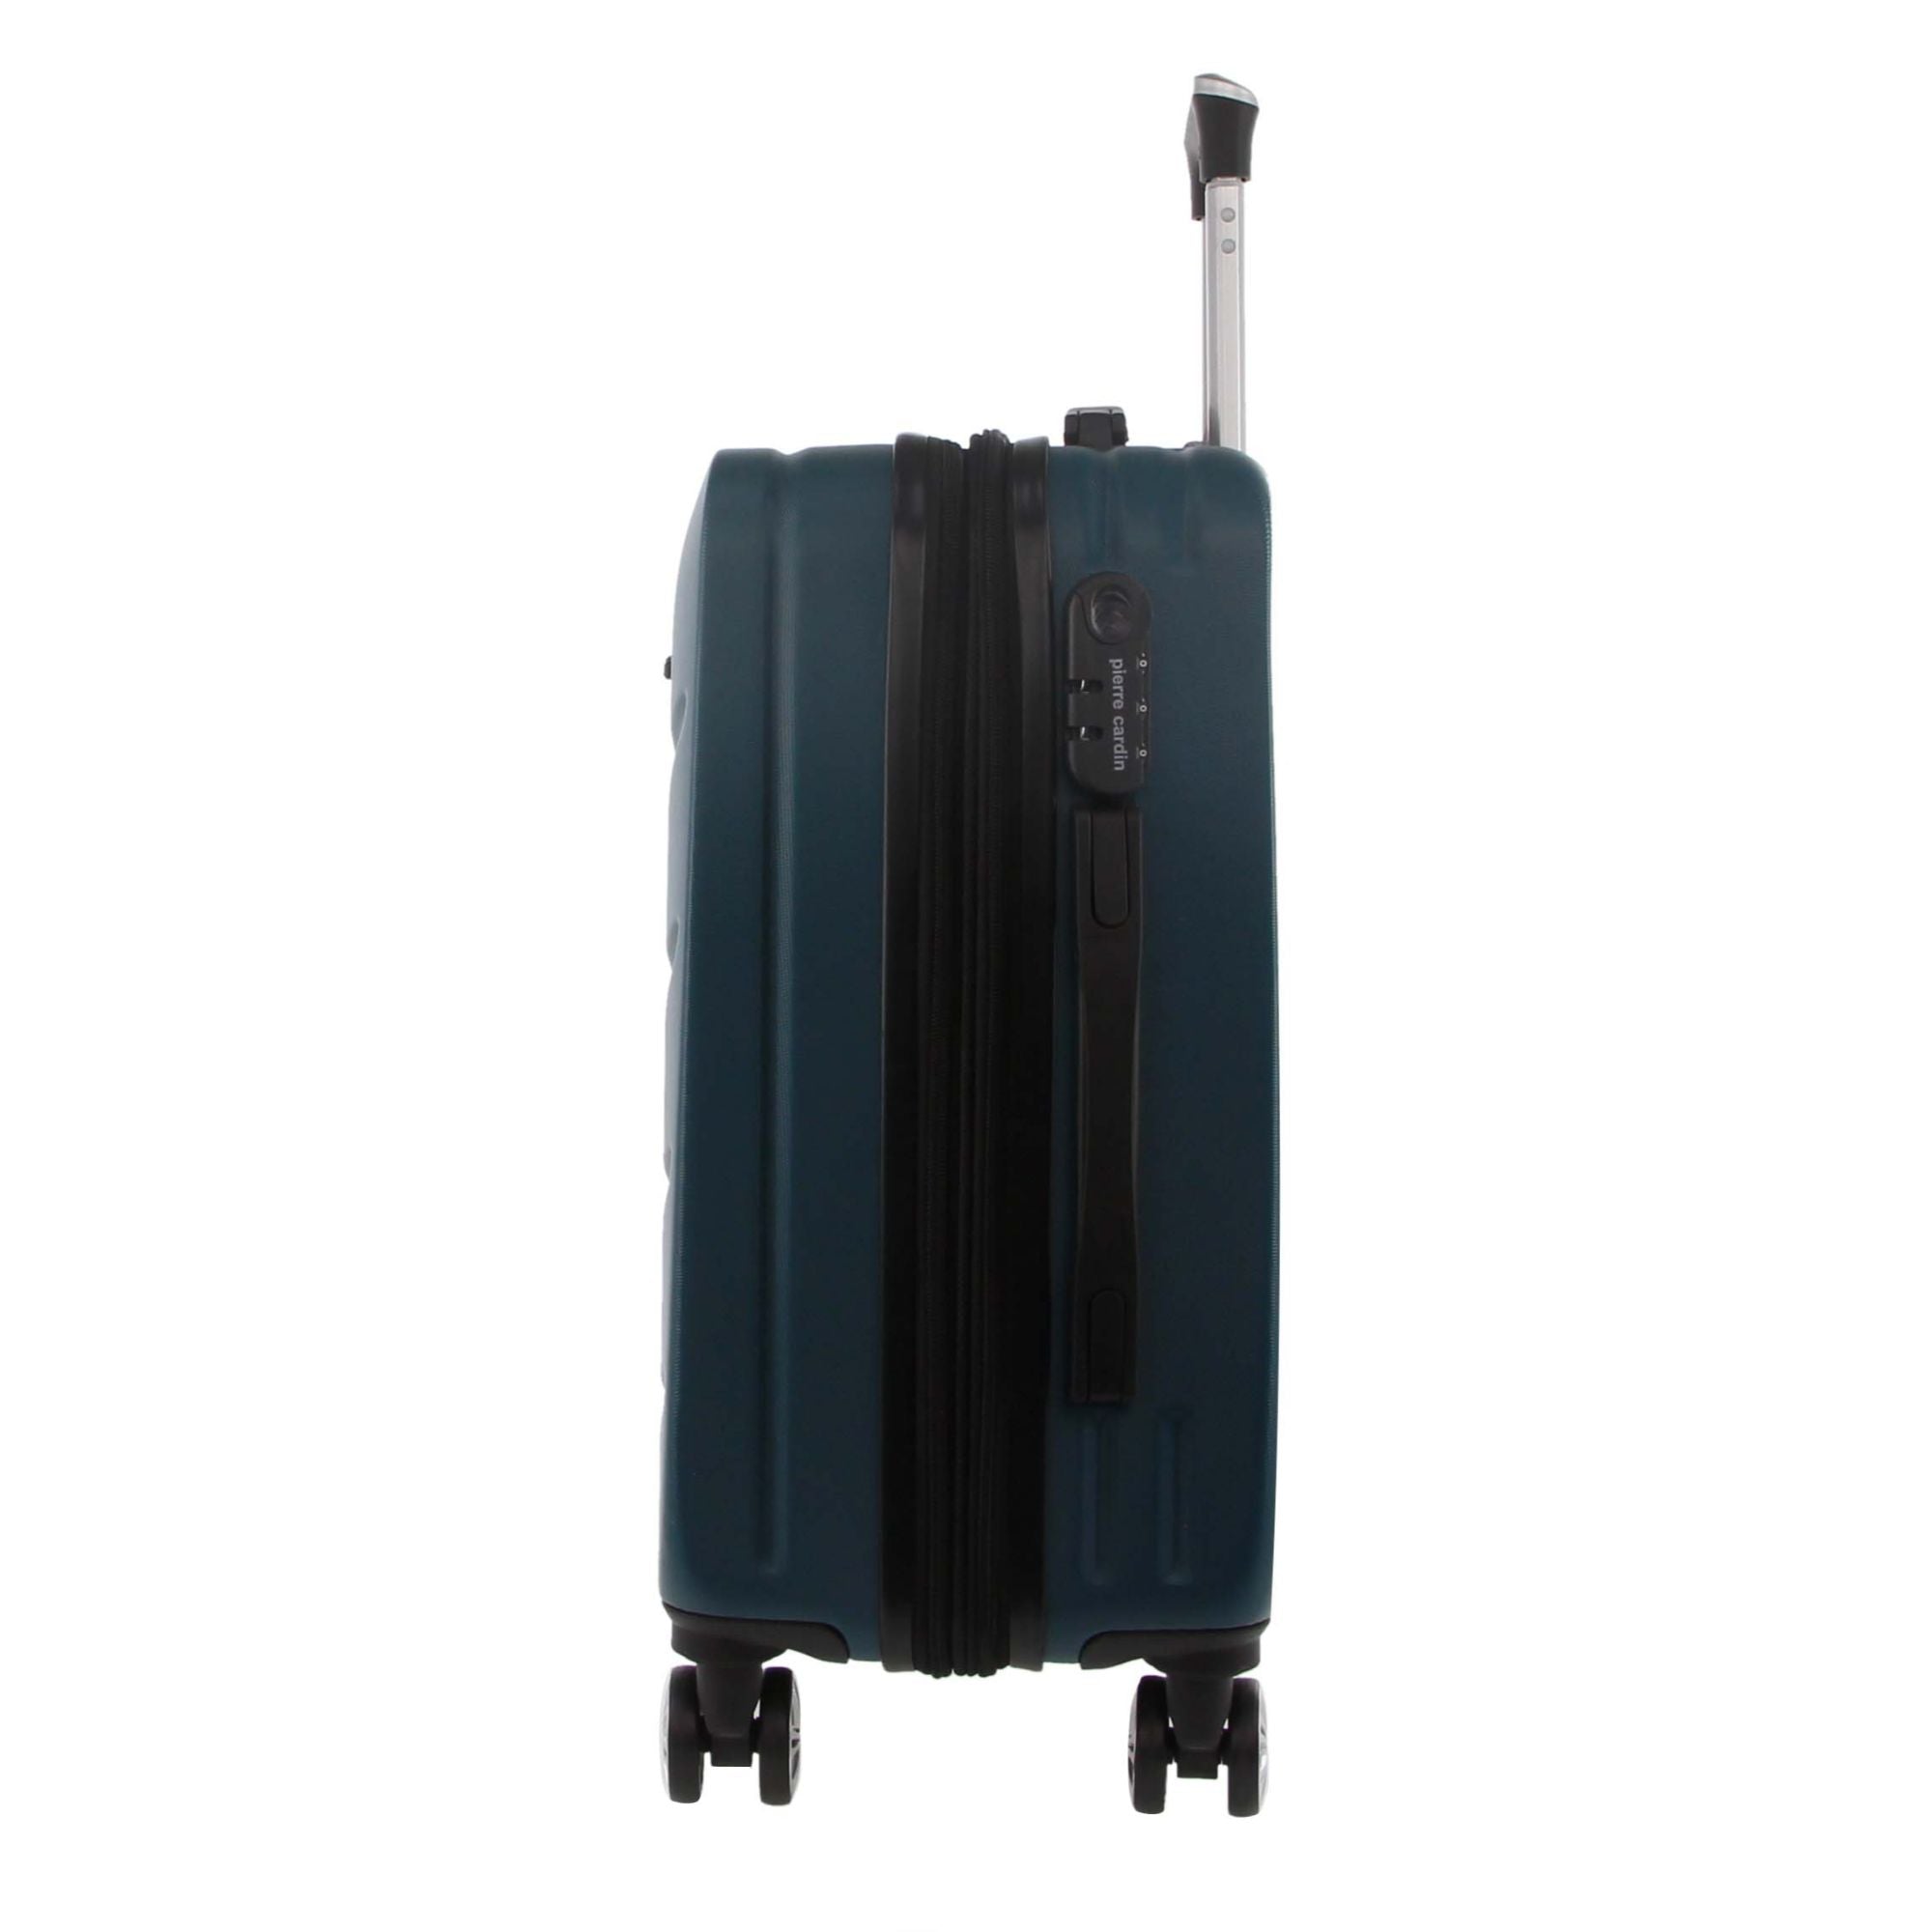 Pierre Cardin - PC3249 Small Hard Suitcase - Teal-3